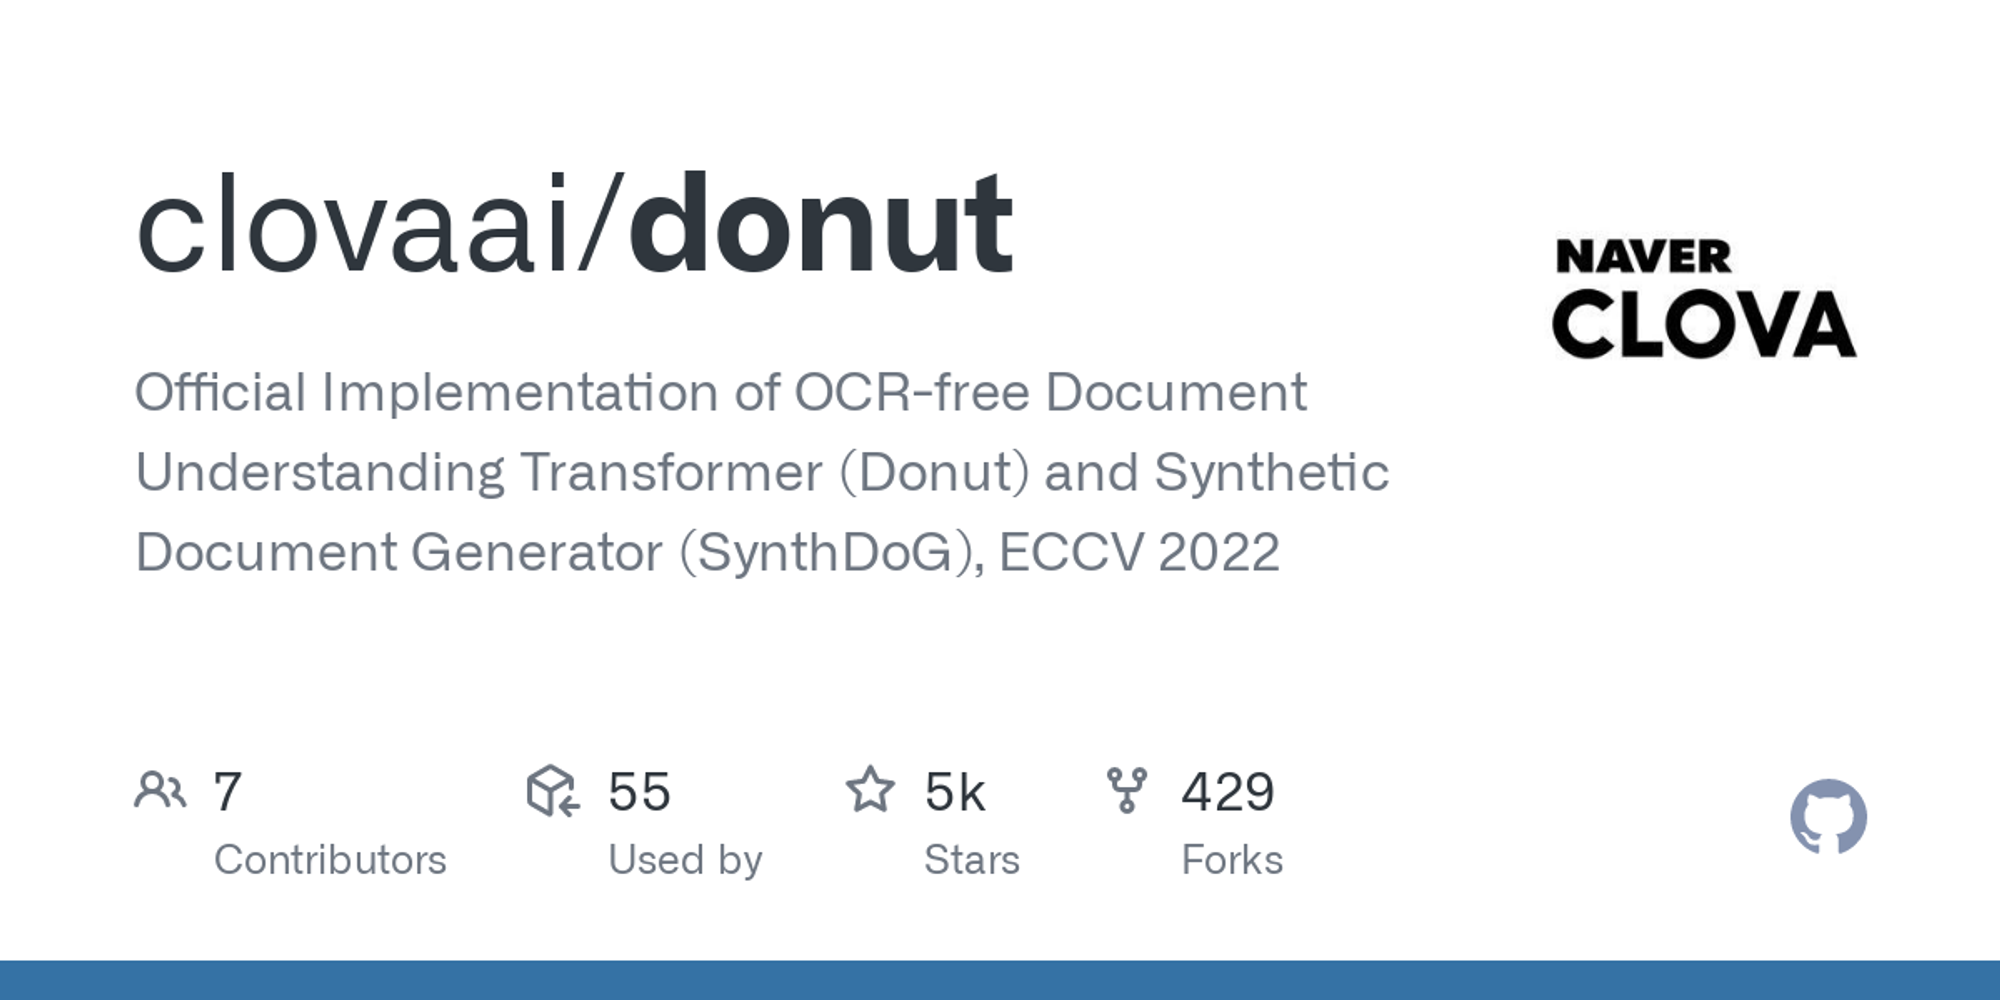 GitHub - clovaai/donut: Official Implementation of OCR-free Document Understanding Transformer (Donut) and Synthetic Document Generator (SynthDoG), ECCV 2022